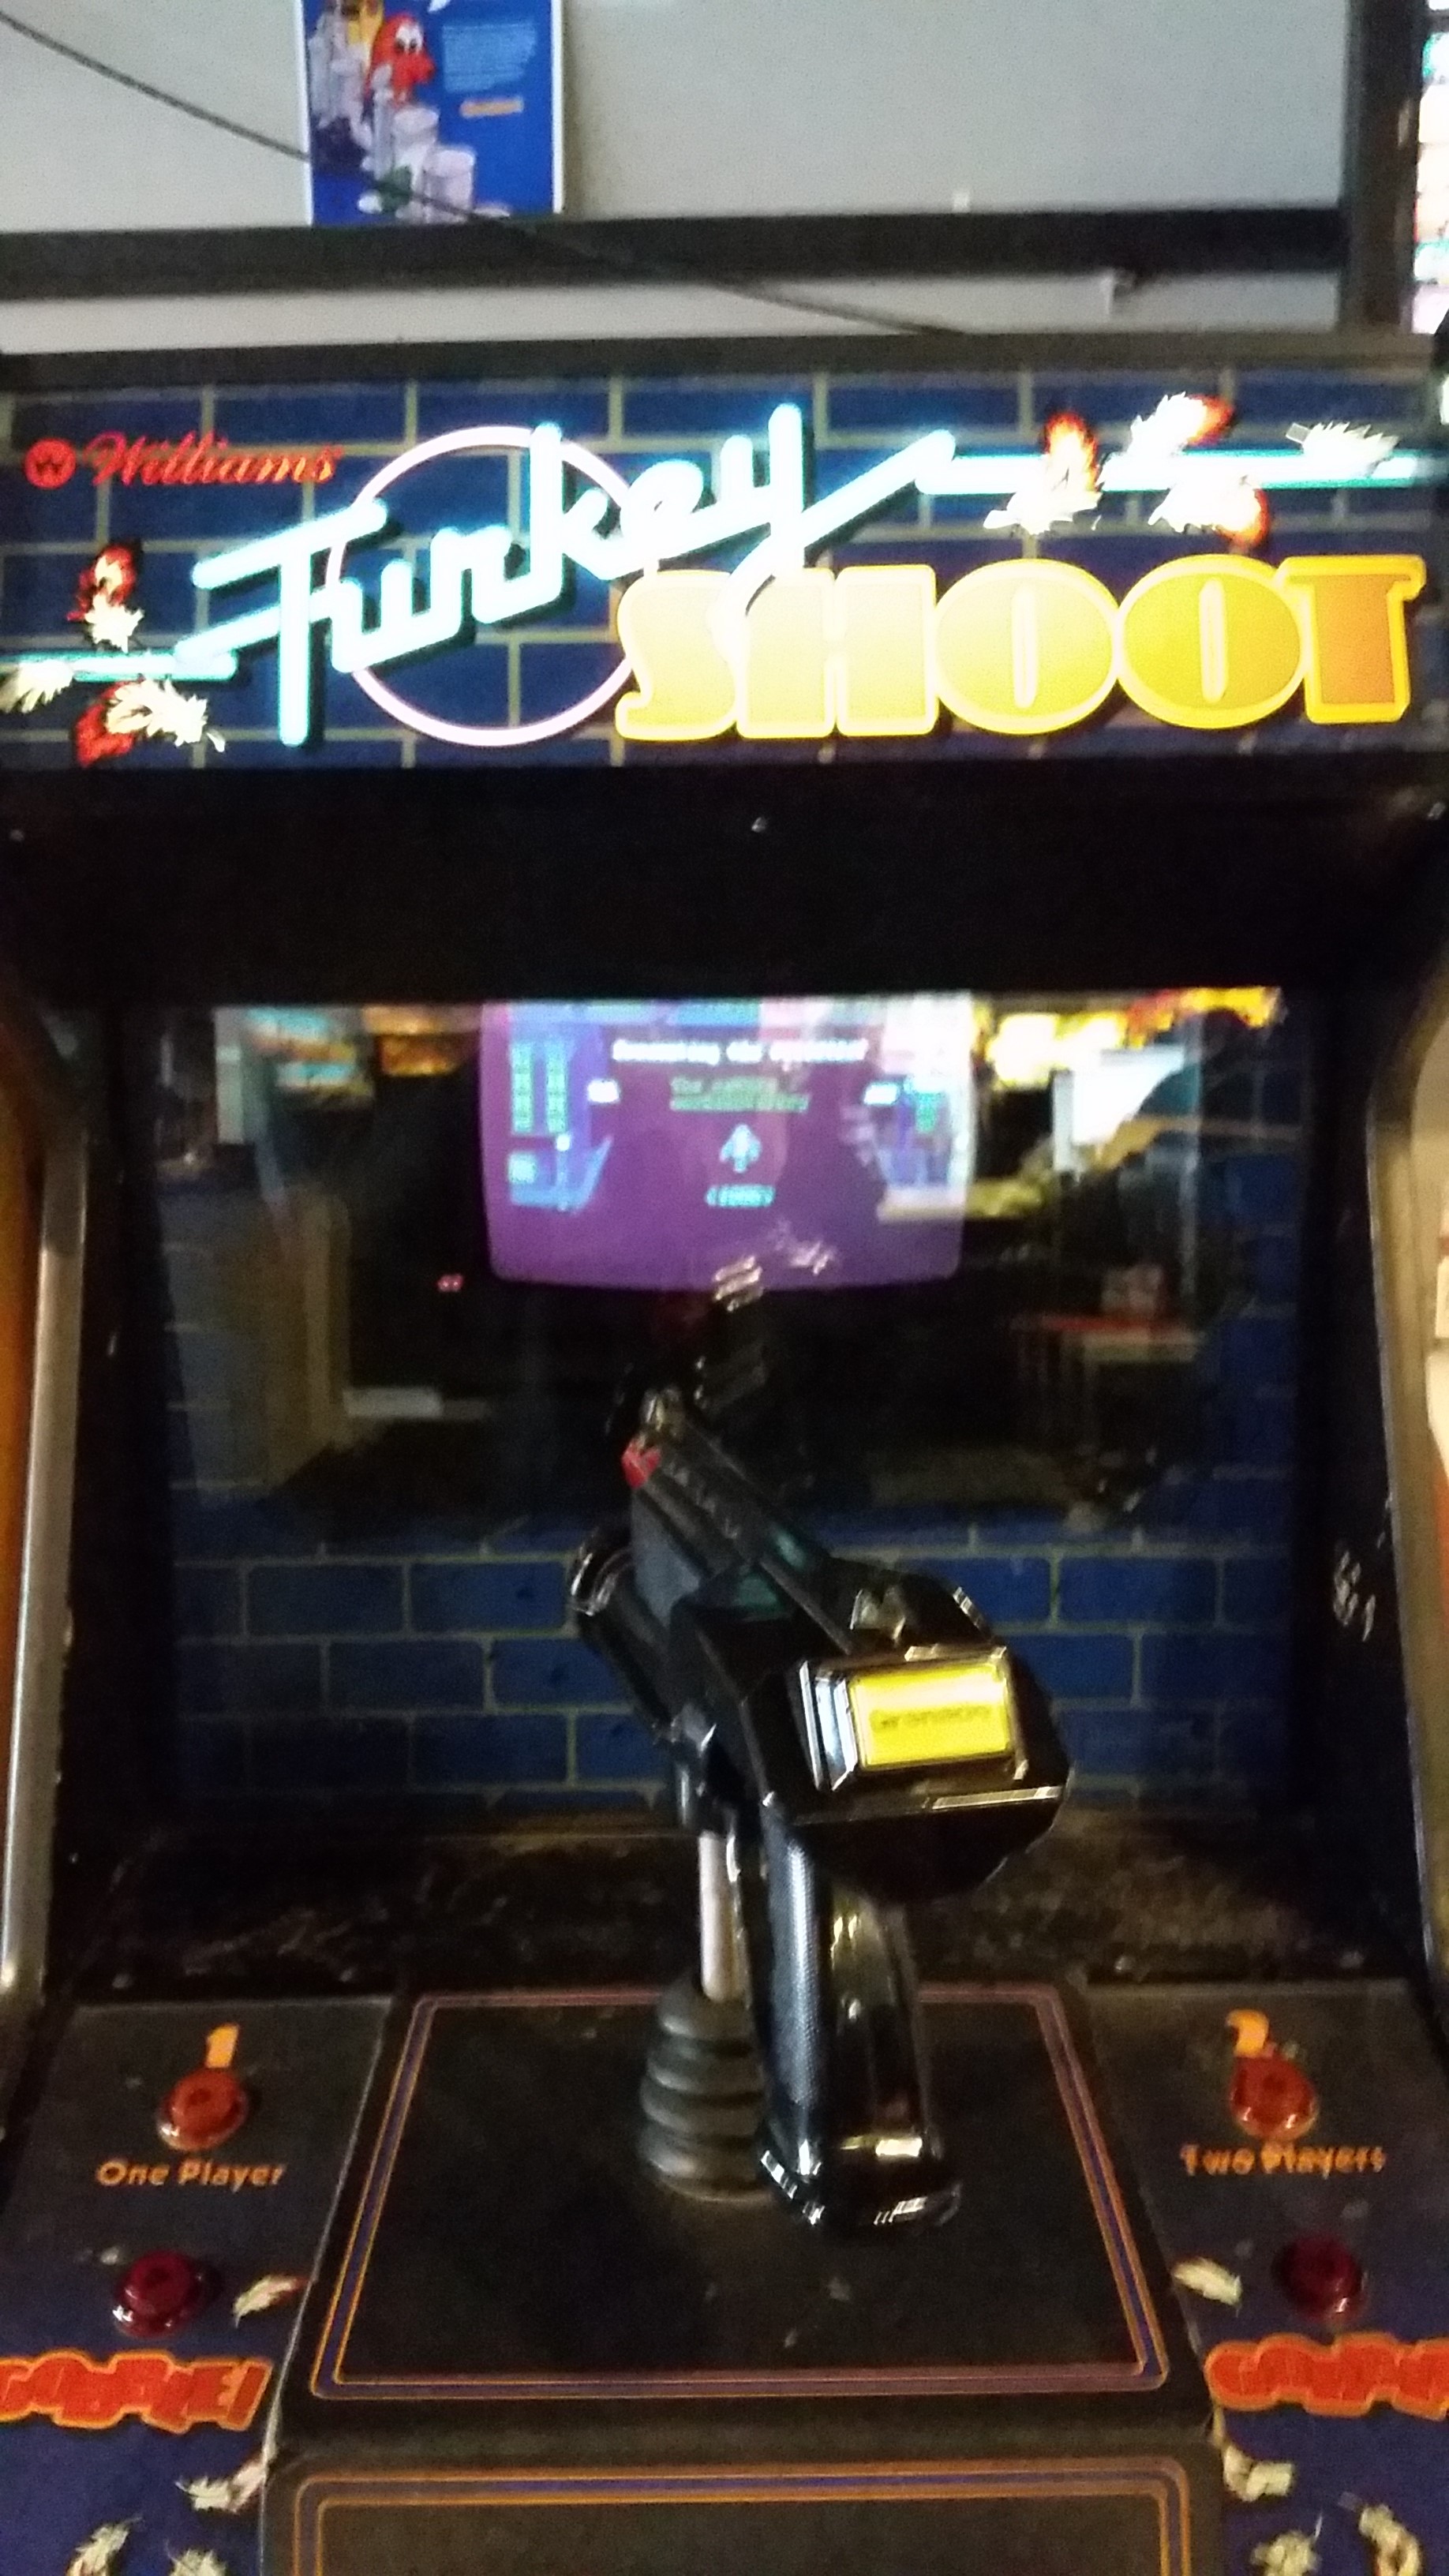 Turkey Shoot now at Galloping Ghost Arcade Galloping Ghost Arcade